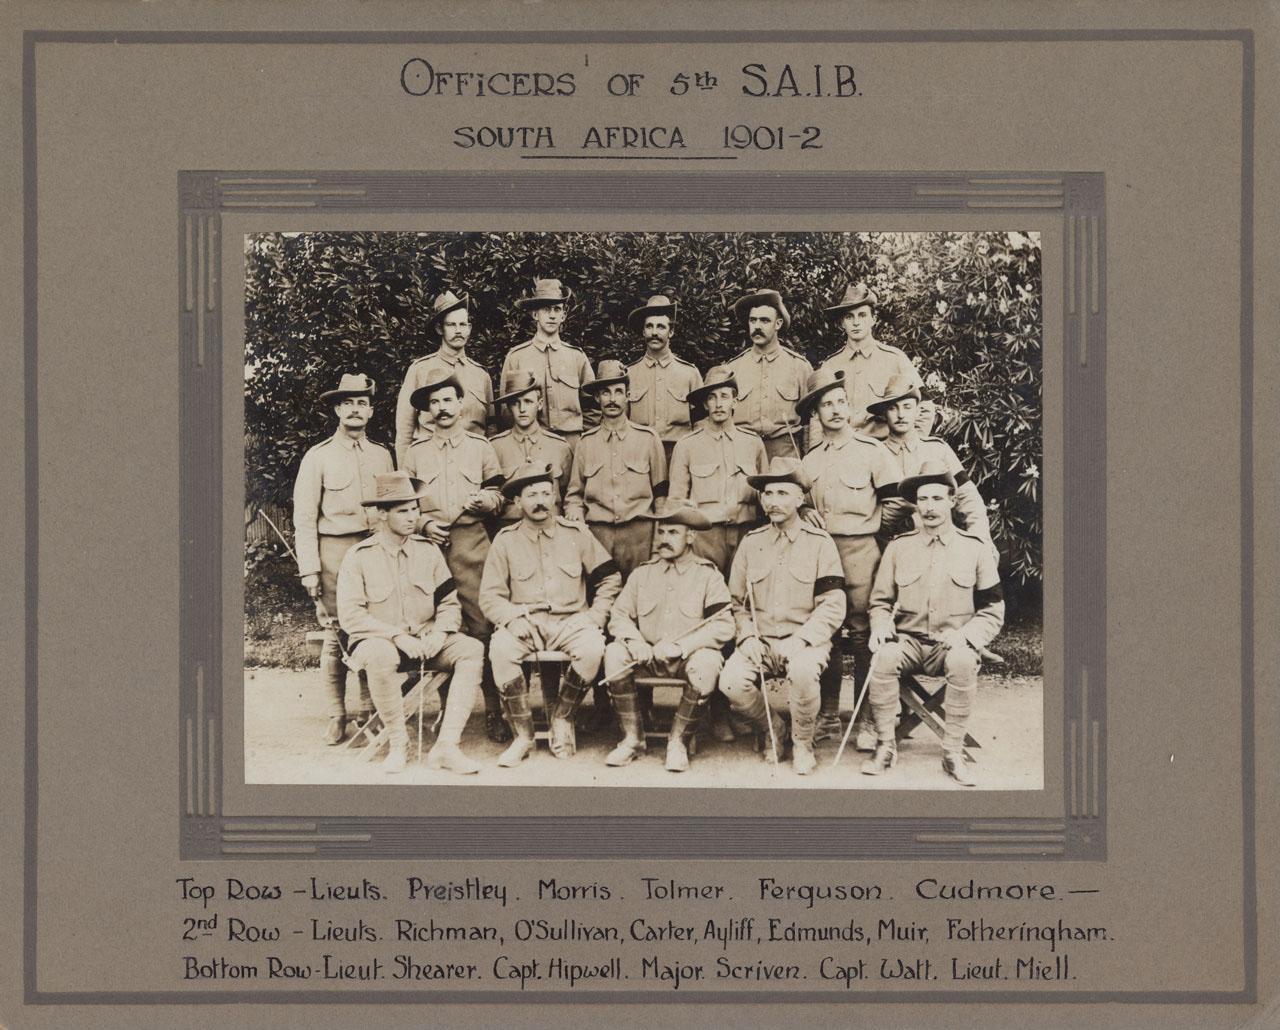 Officers of fifth S.A.I.B, South Africa, 1901-02. SLSA: B49571